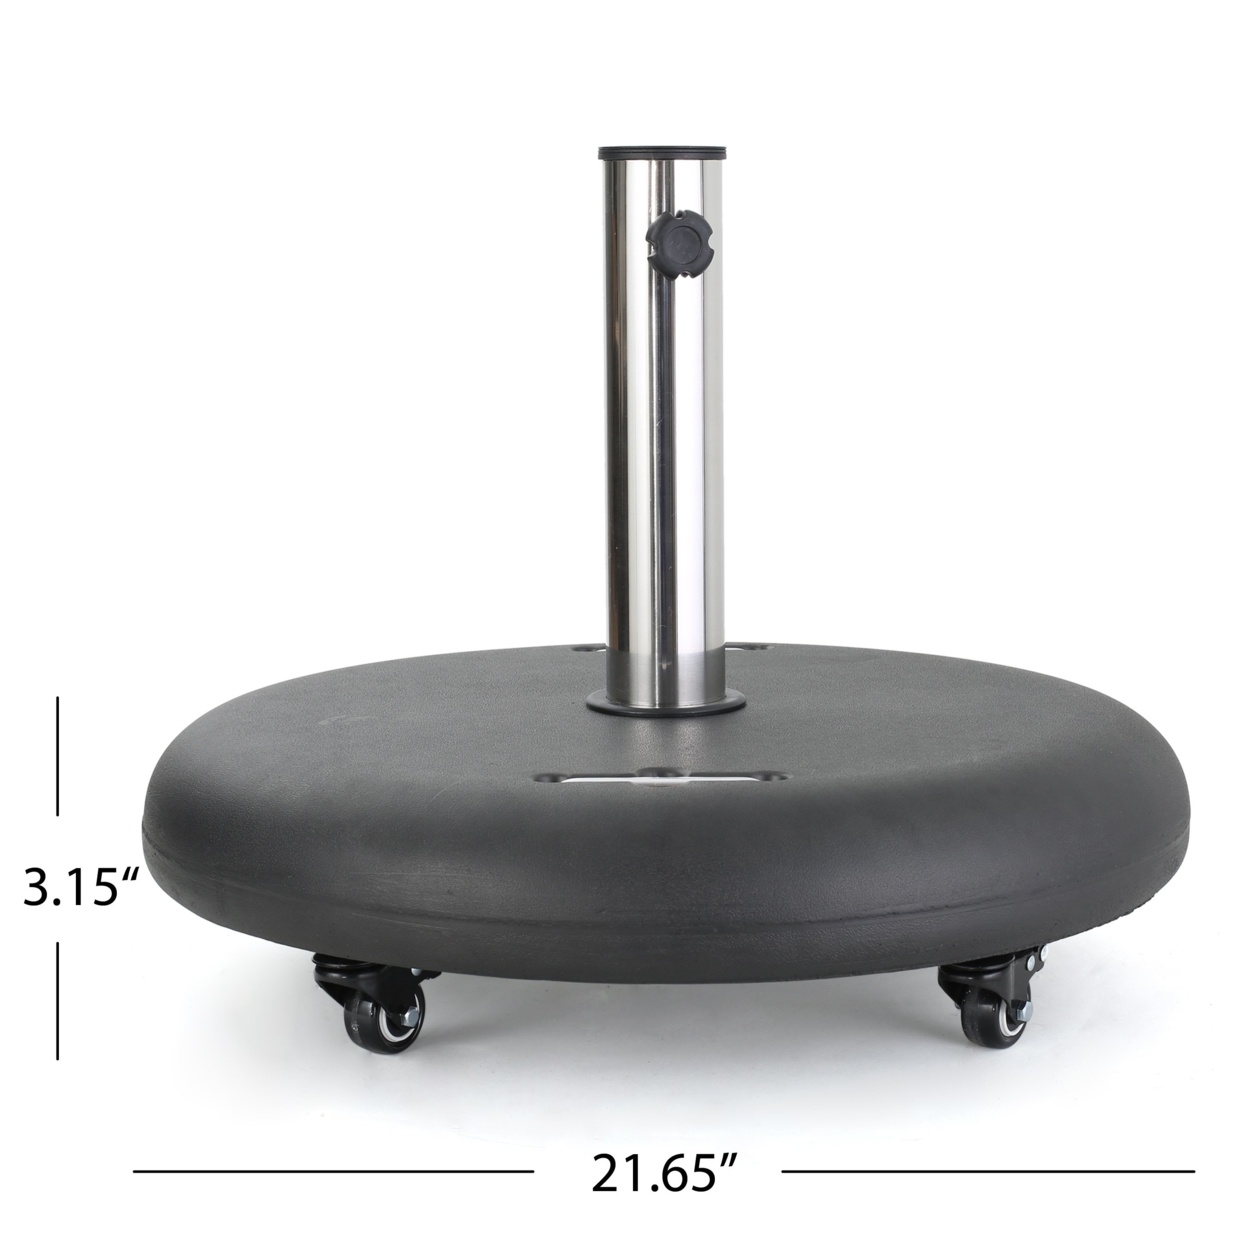 Hercules 88lbs Umbrella Base With Wheels & Stainless Steel Pole Handle